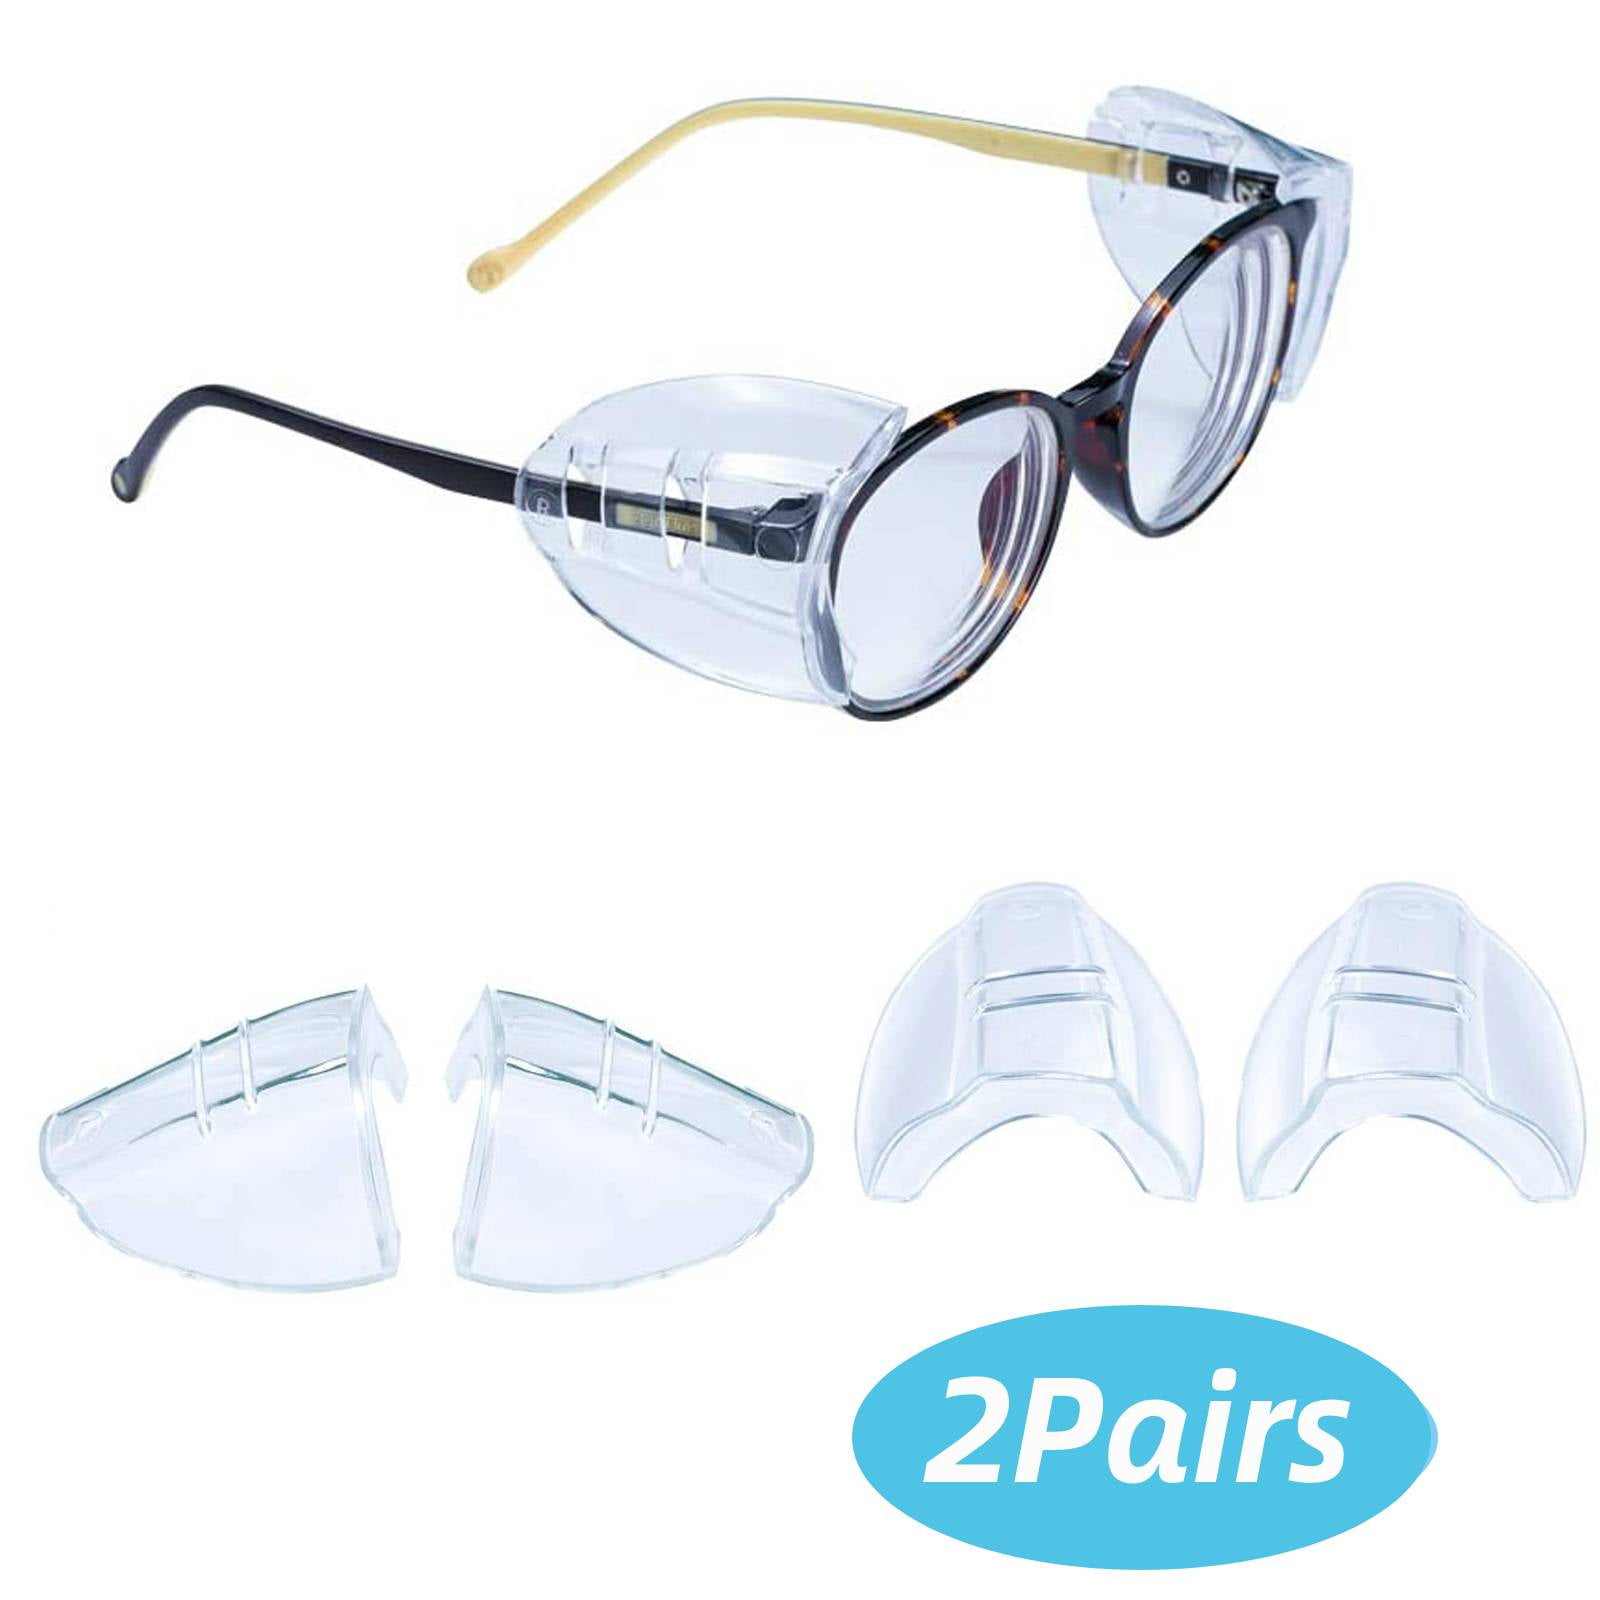 PPE Safety Glasses Side Protection for Specs Glasses Accessories Non-toxic SALE 